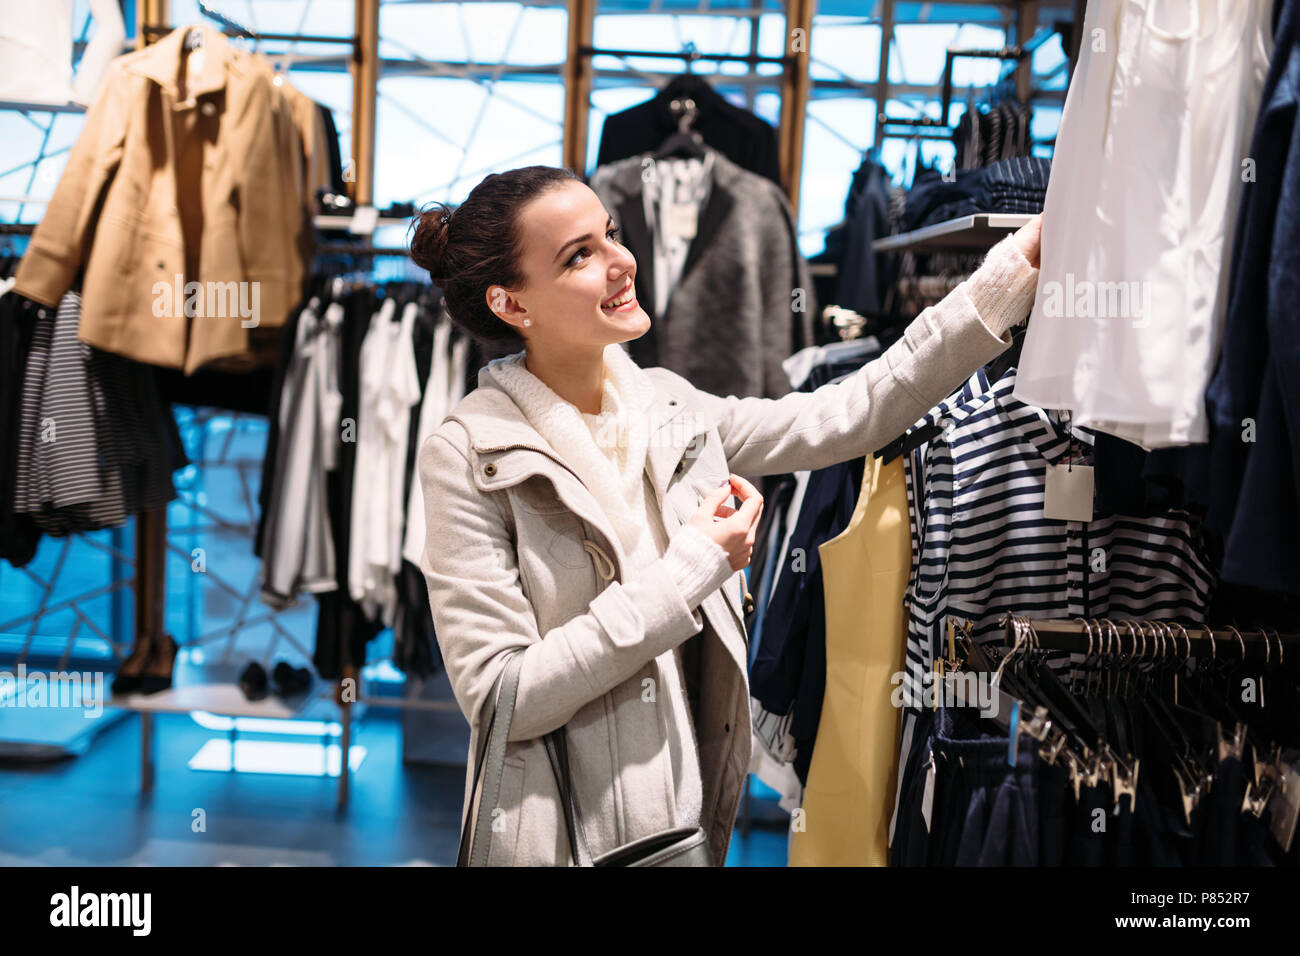 Young attractive woman buying clothes in mall Stock Photo